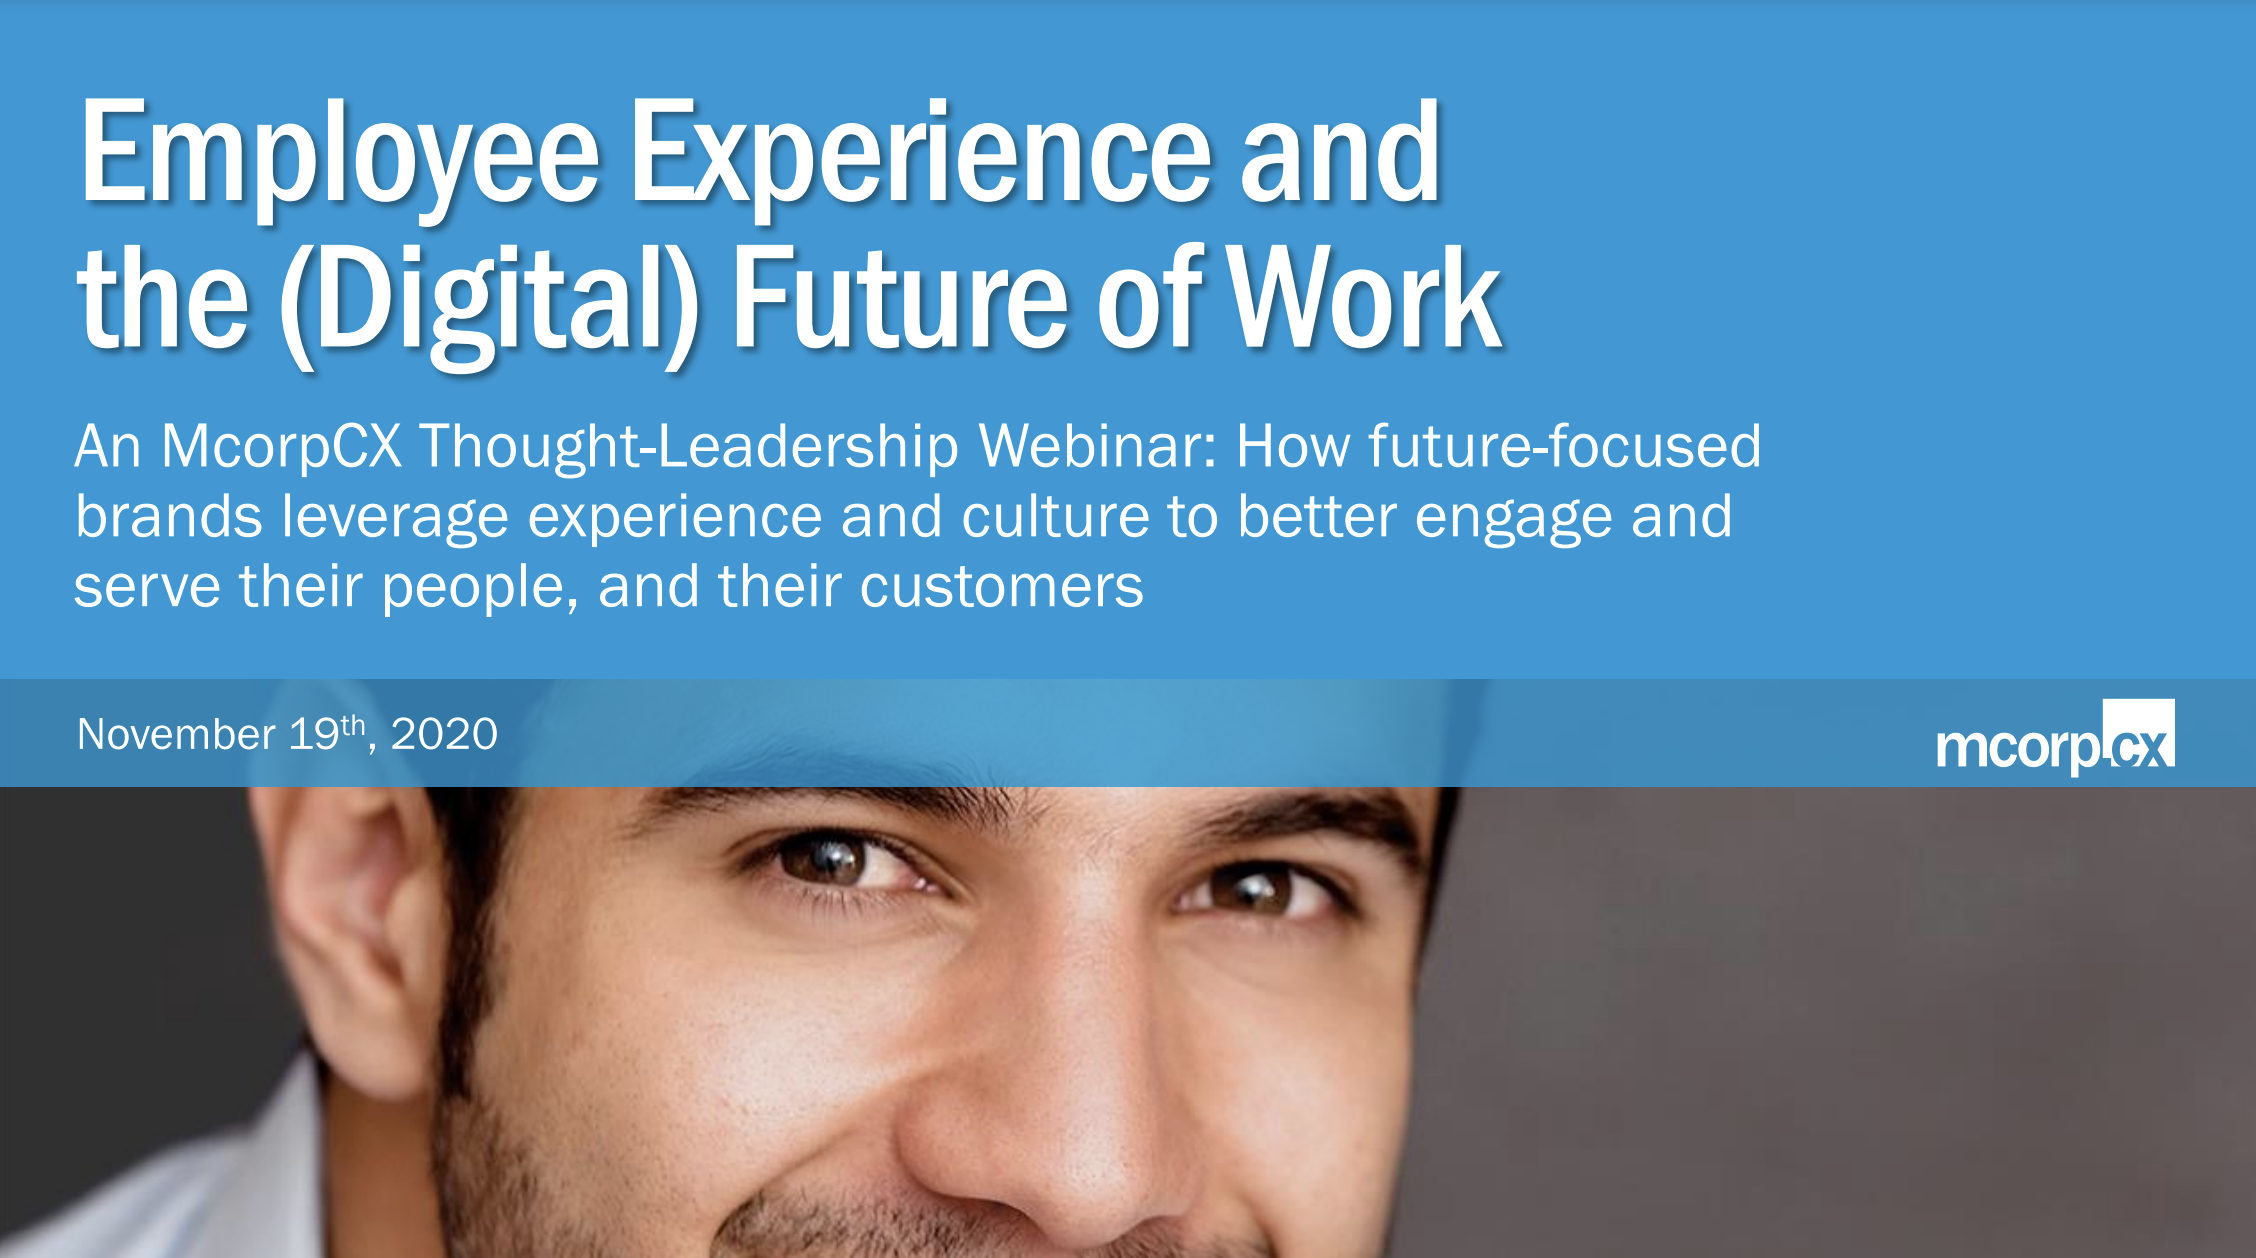 Employee Experience and the (Digital) Future of Work